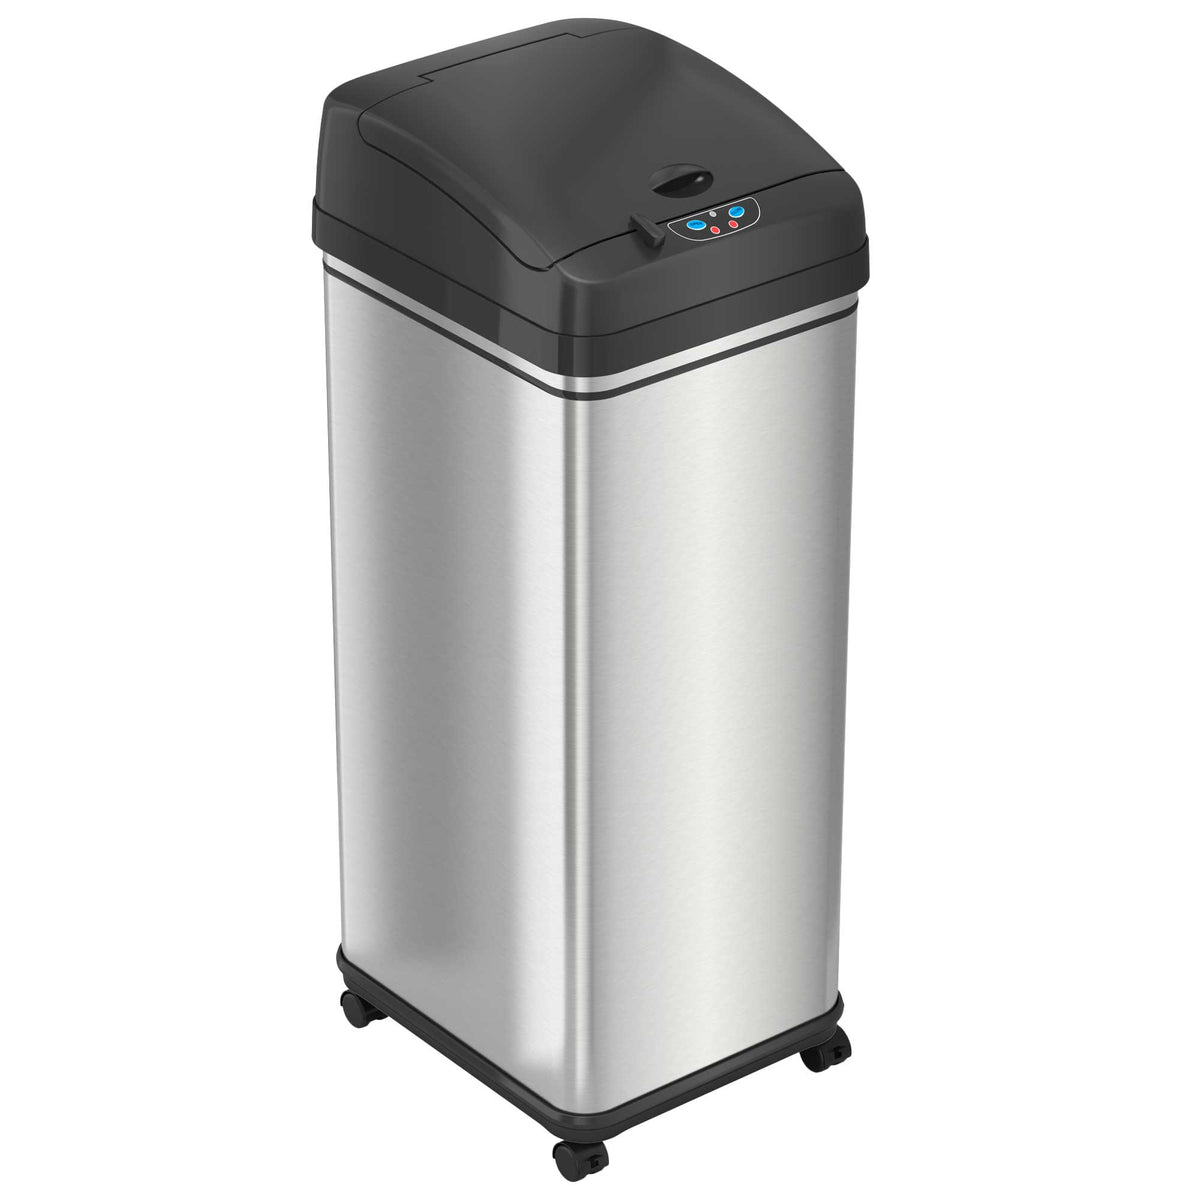 iTouchless Stainless Steel Trash Can with wheels